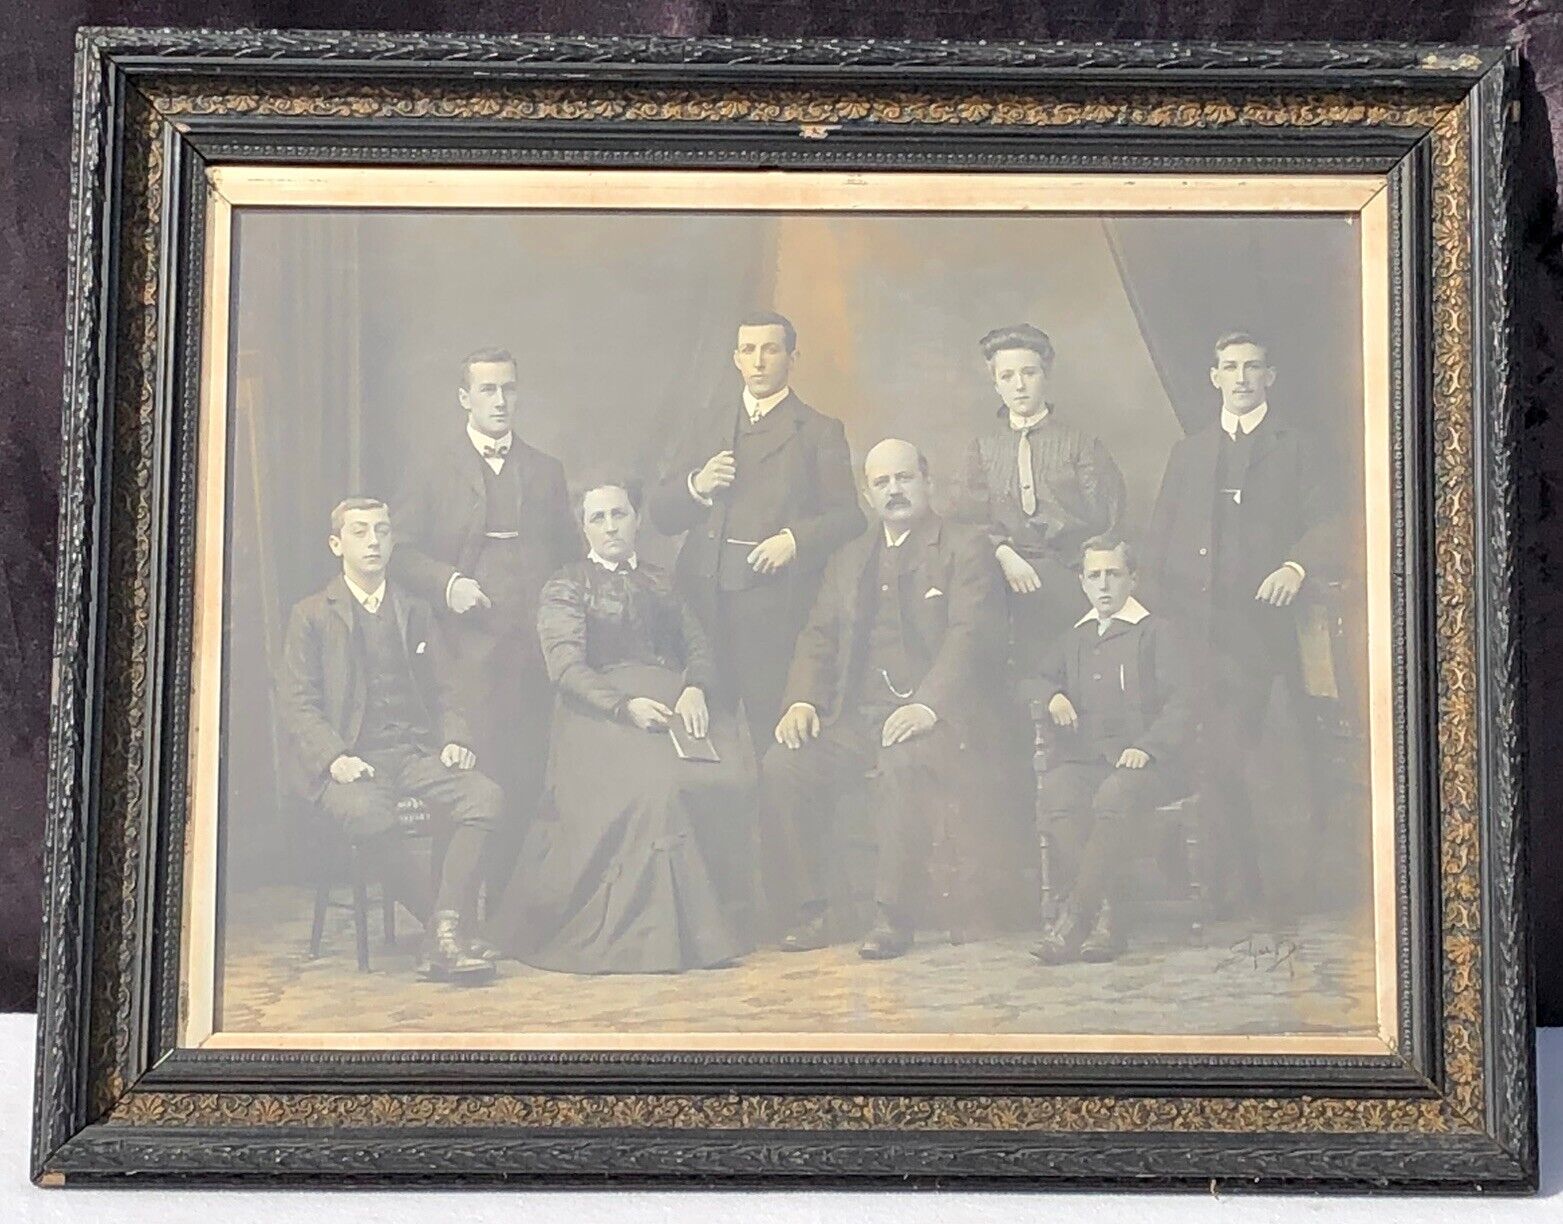 Circa 1880's Large Family Cabinet Card Photo Framed in an Antique Gesso Frame